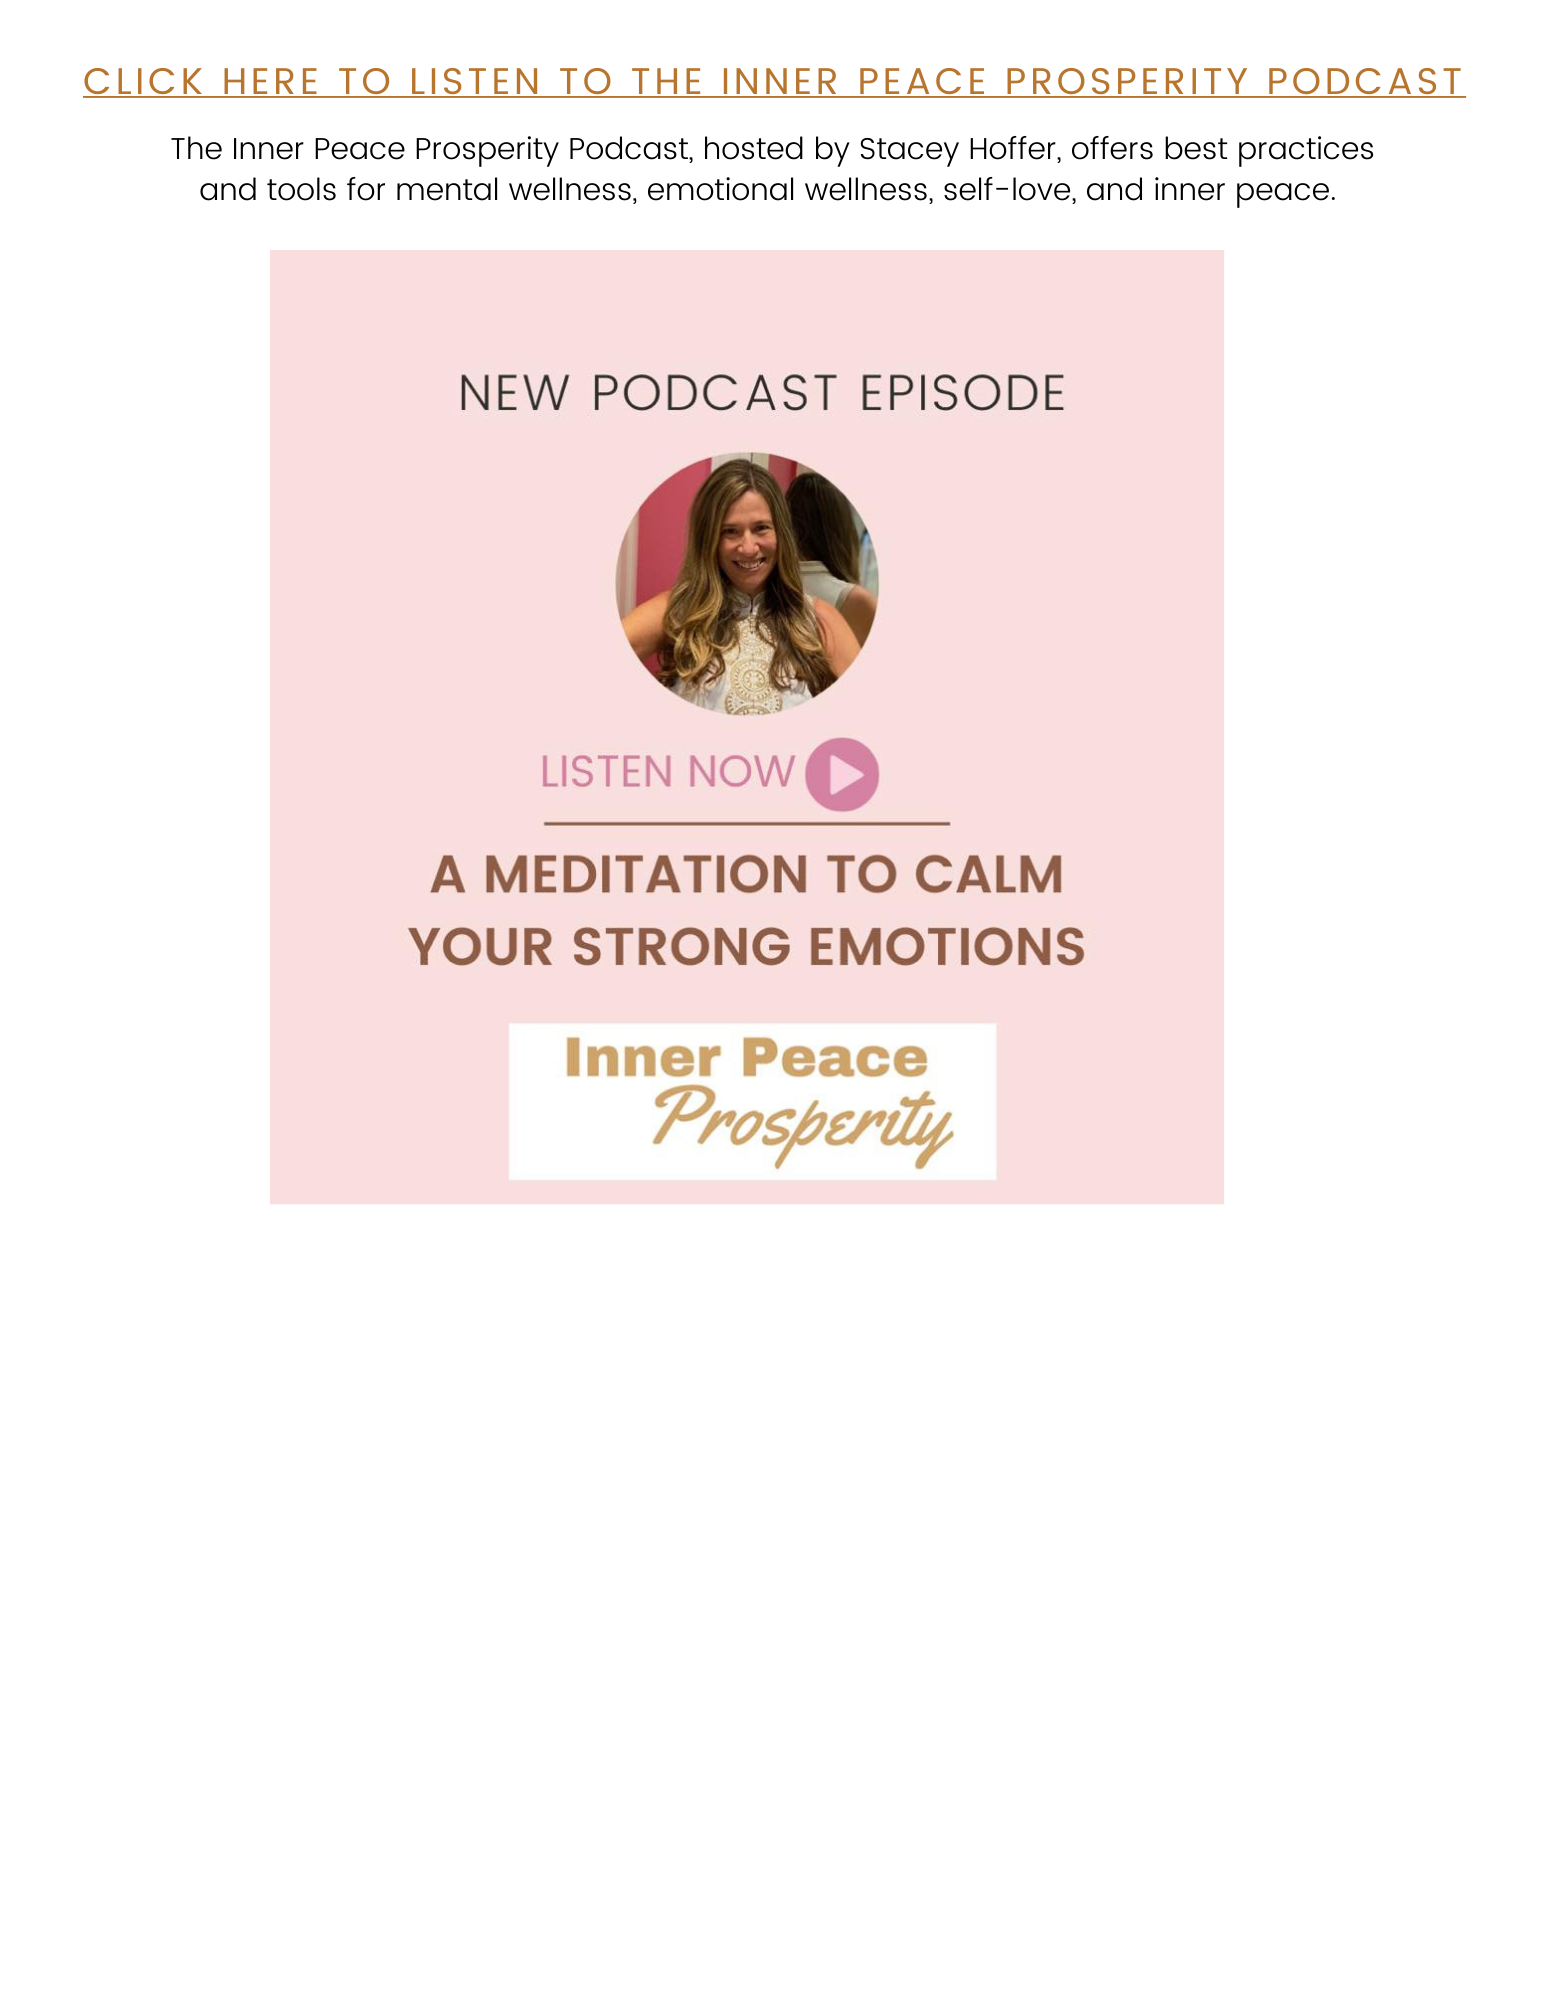 Inner Peace Prosperity Podcast, hosted by Stacey Hoffer, offers best practices and tools for mental wellness, emotional wellness, self-love, and inner peace.